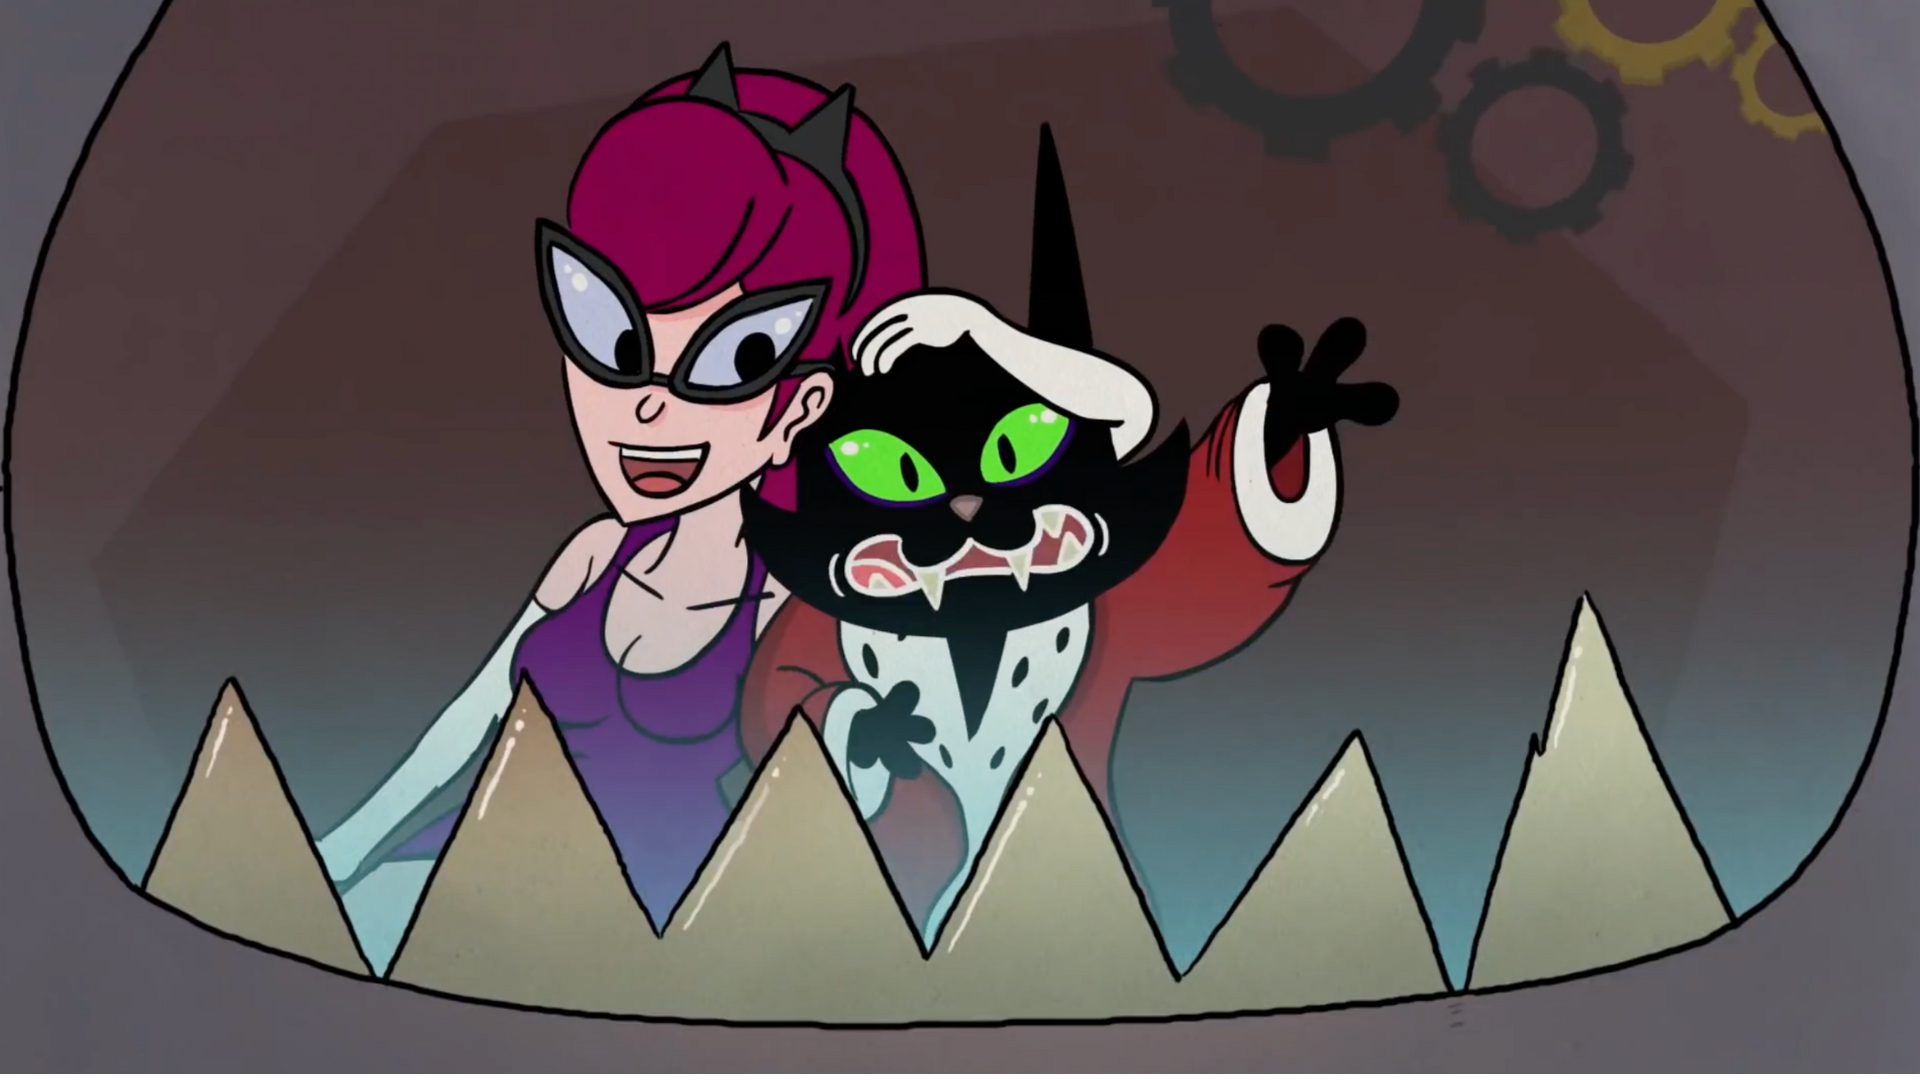 Screenshot from The King of Claws animated music video by The Stolen Moans